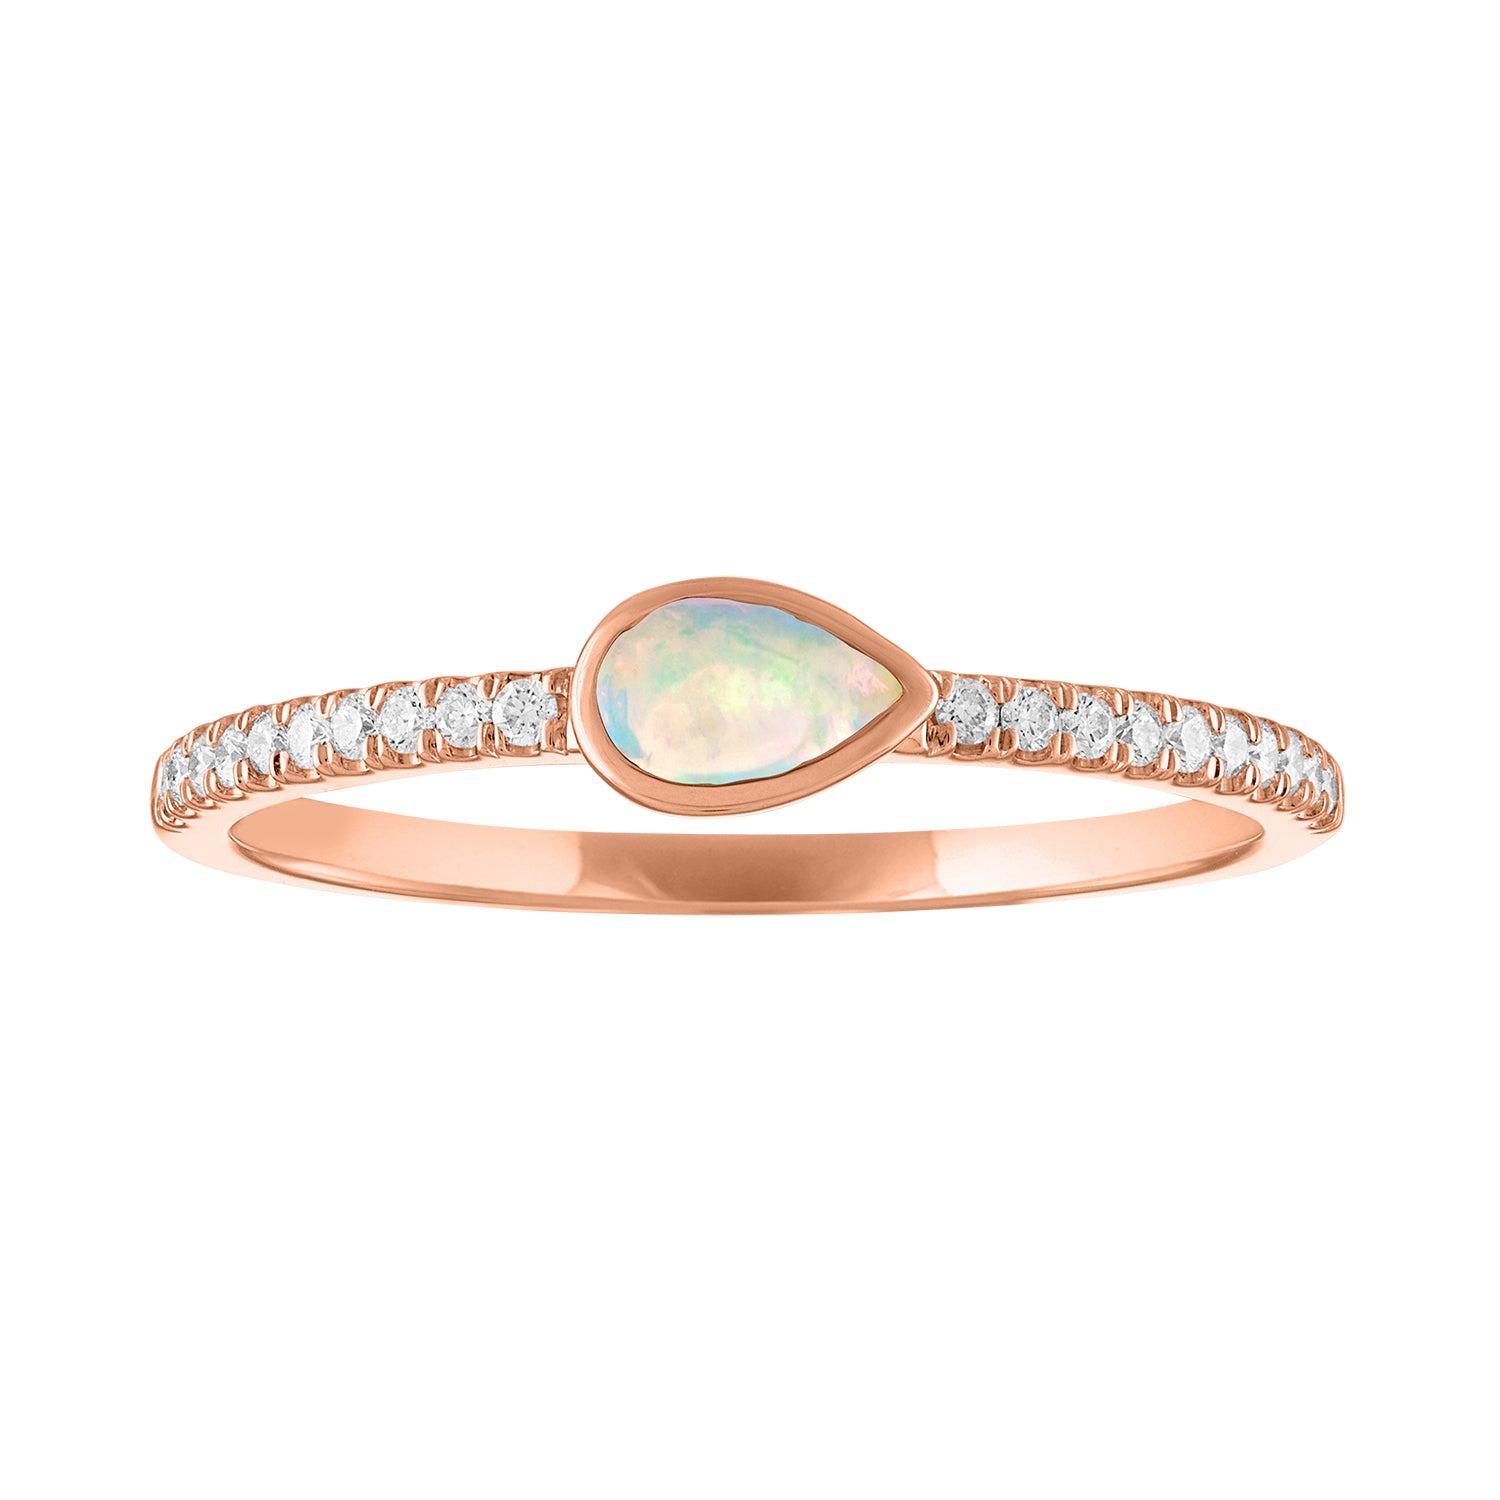 Rose gold skinny band with a bezeled pear shape opal in the center and round diamonds on the shank. 